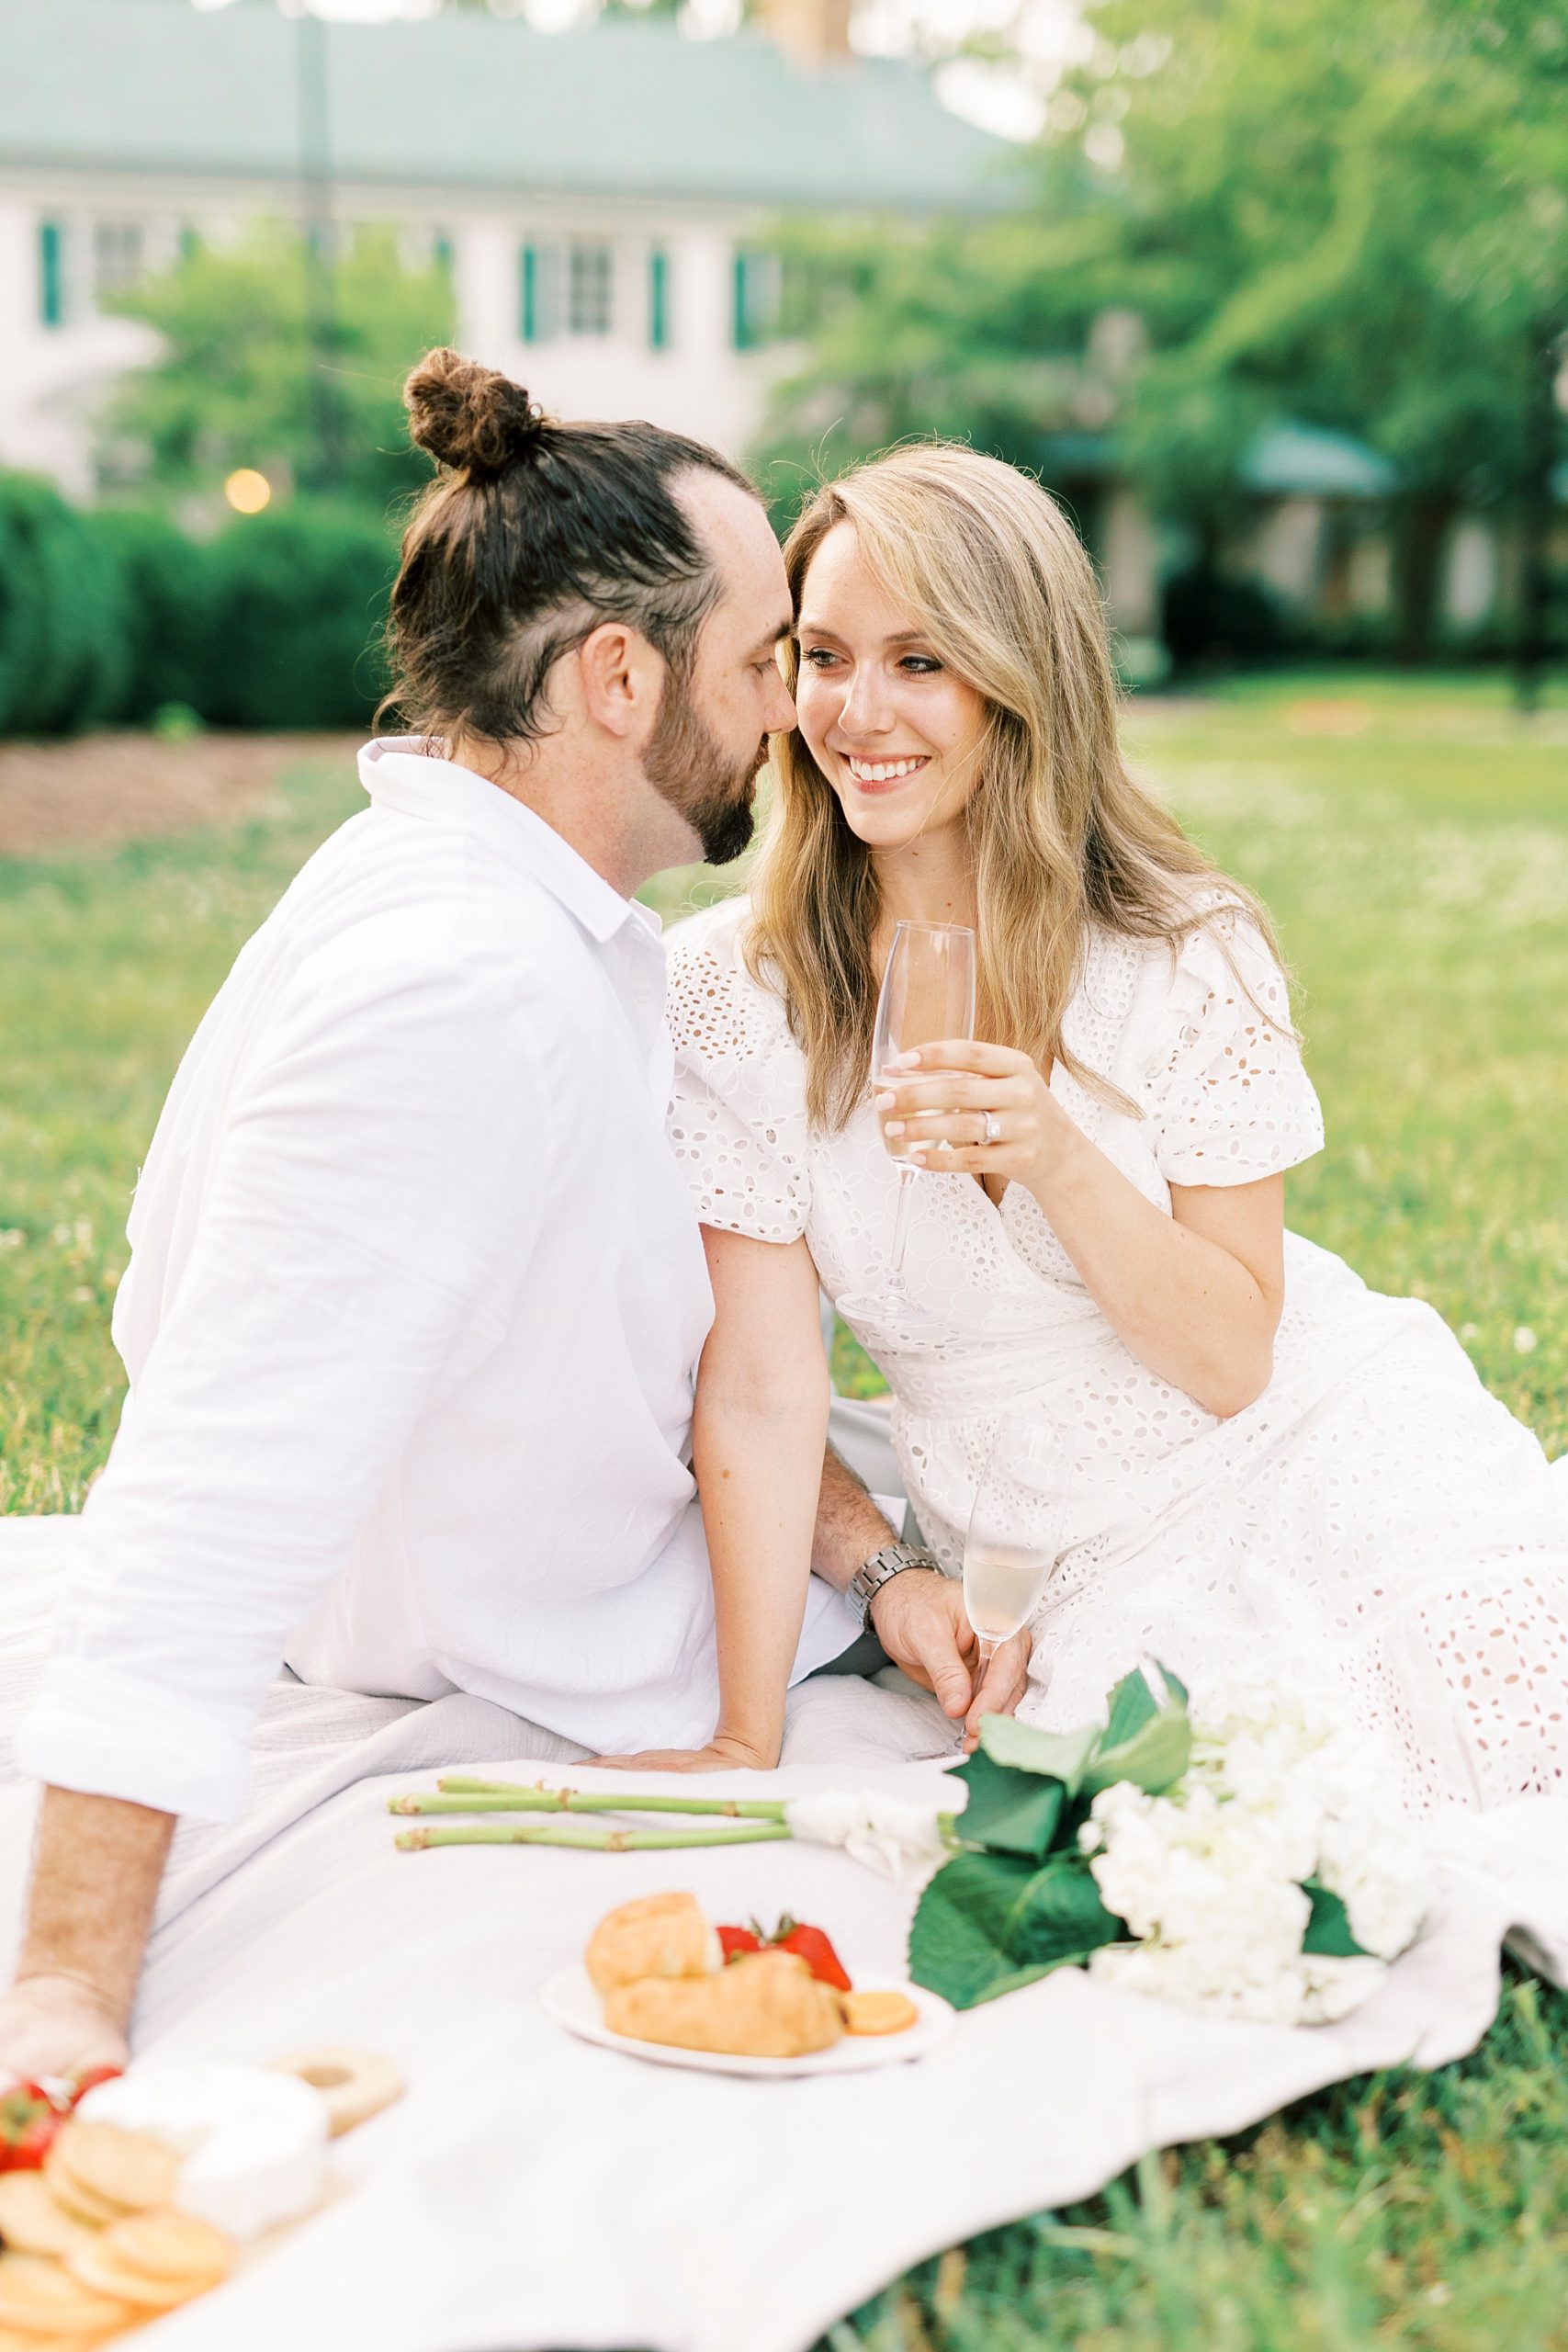 groom nuzzles bride's cheek during picnic 